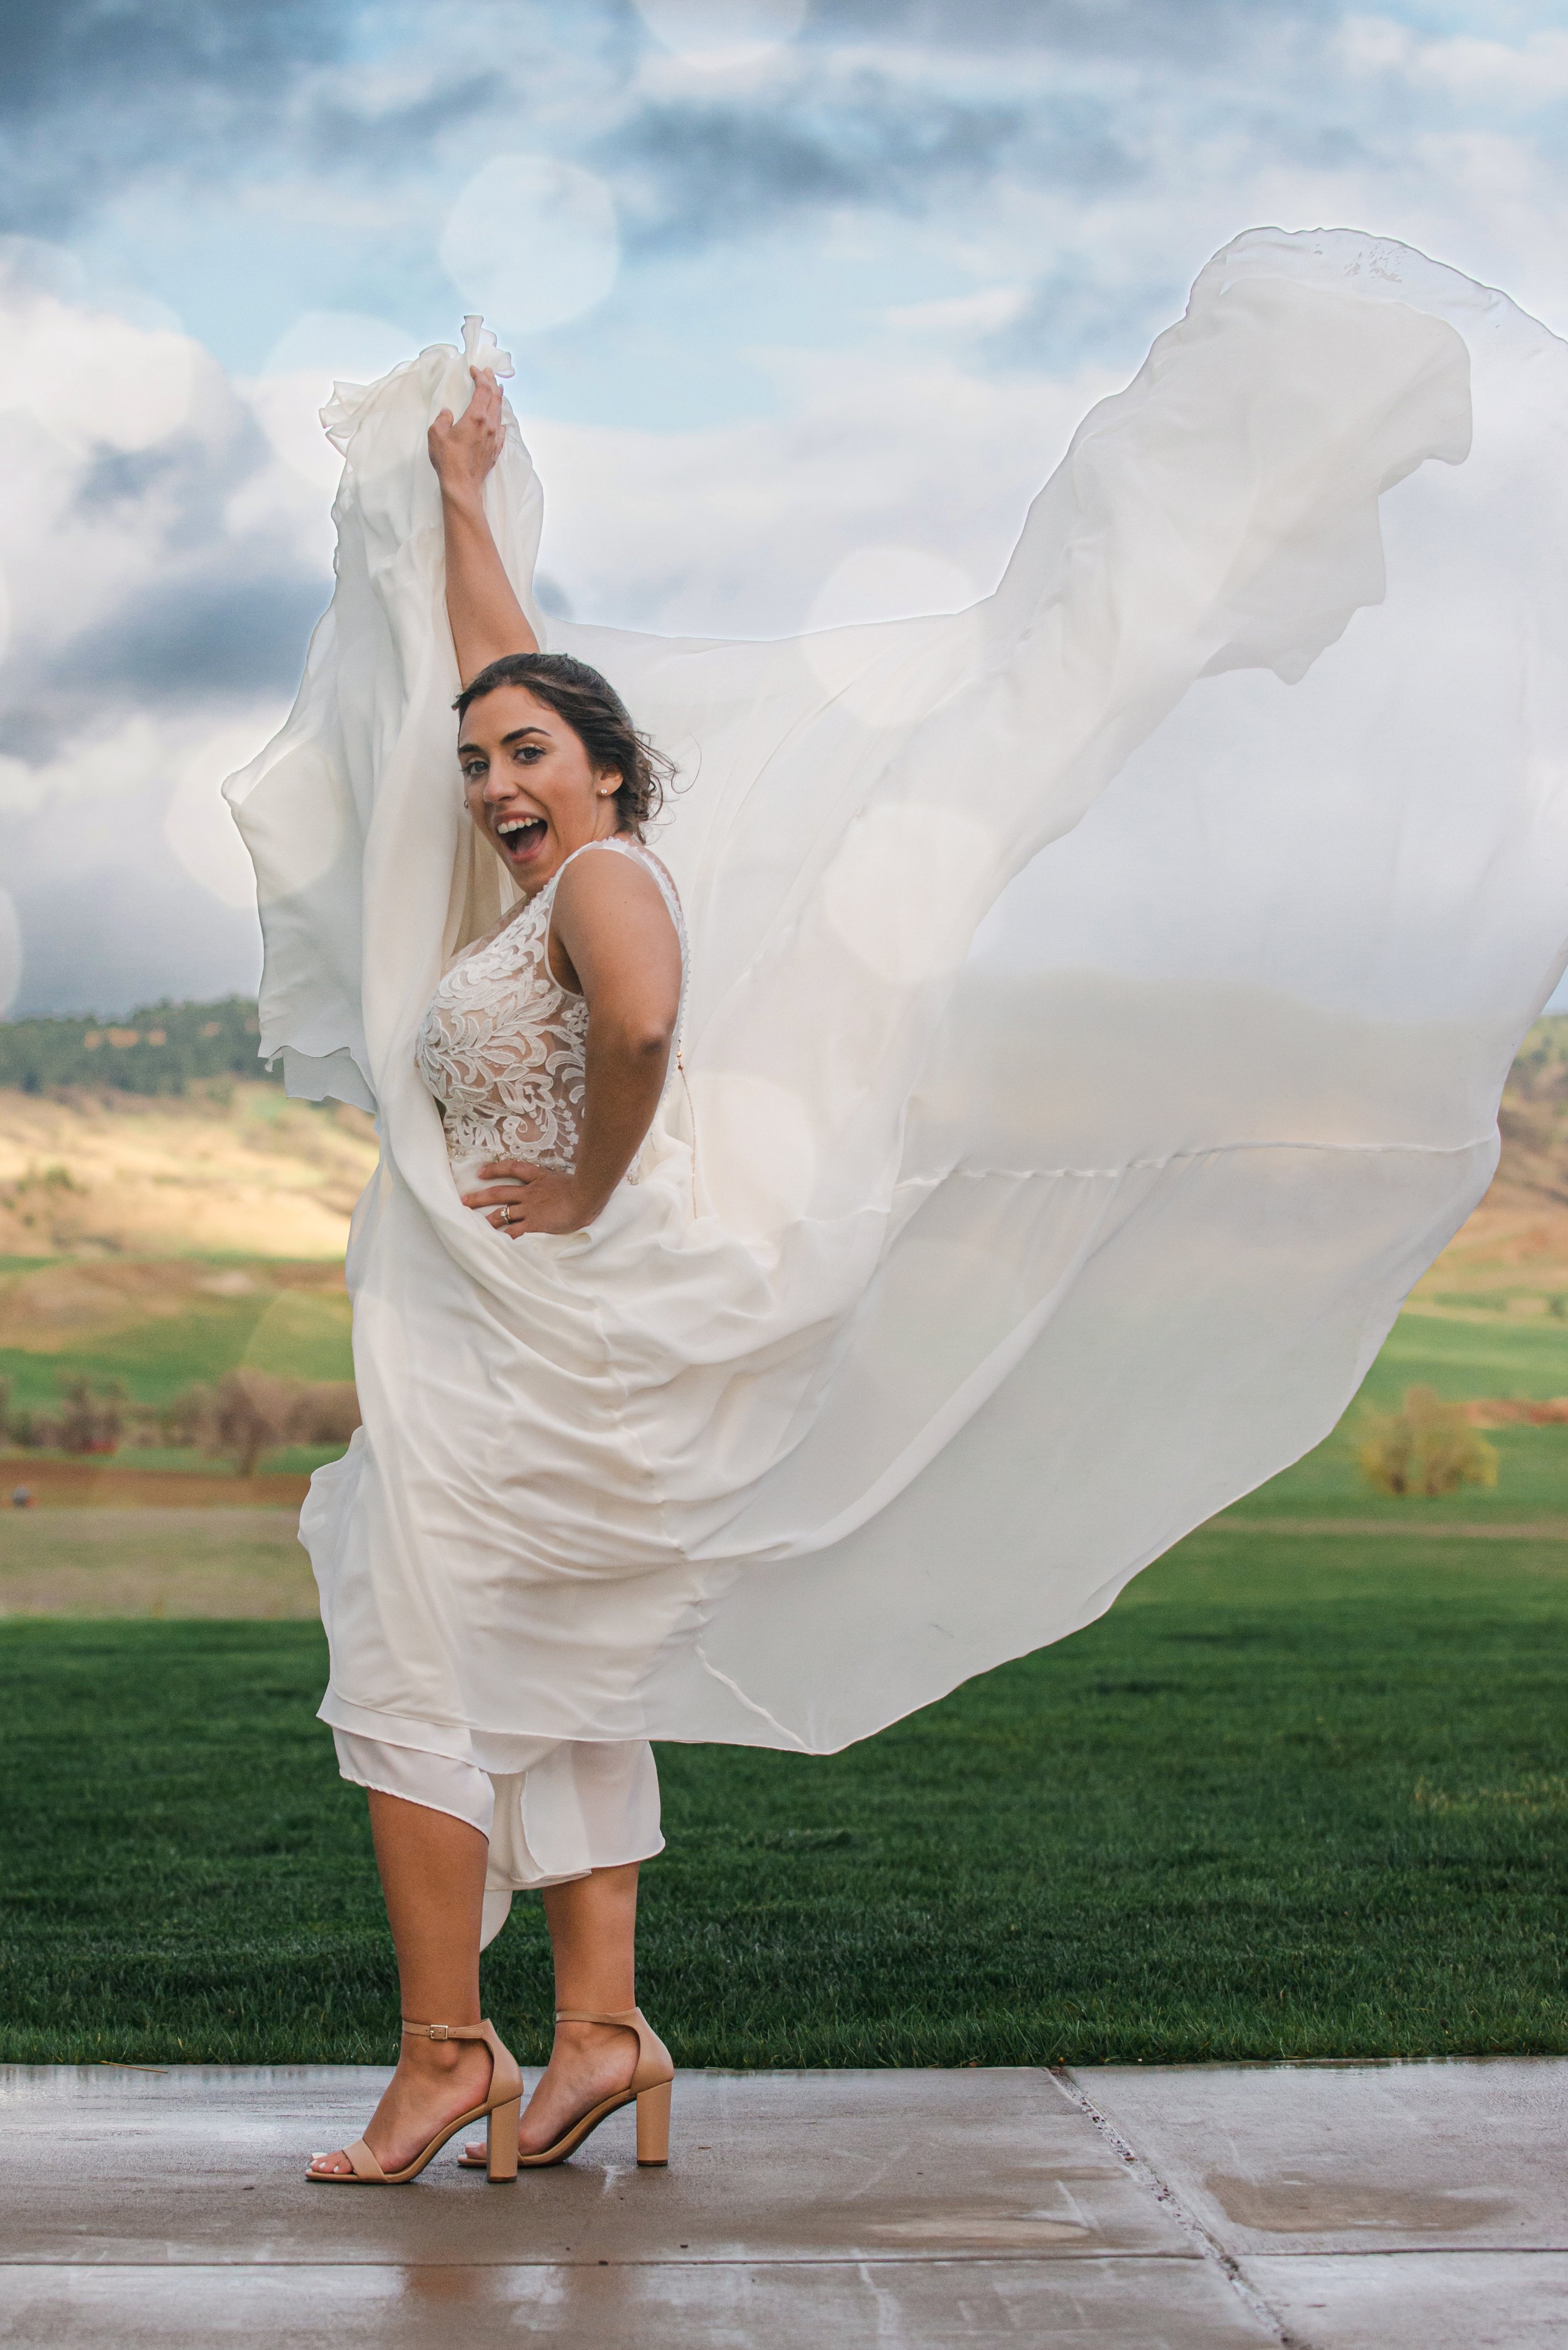  Bride: Caitlyn Coscarelli  Photography: Royal Orchid Creations  Makeup: Kenzie McCLure  Hair: Abigail Nelson  &amp; Valori Tyre 